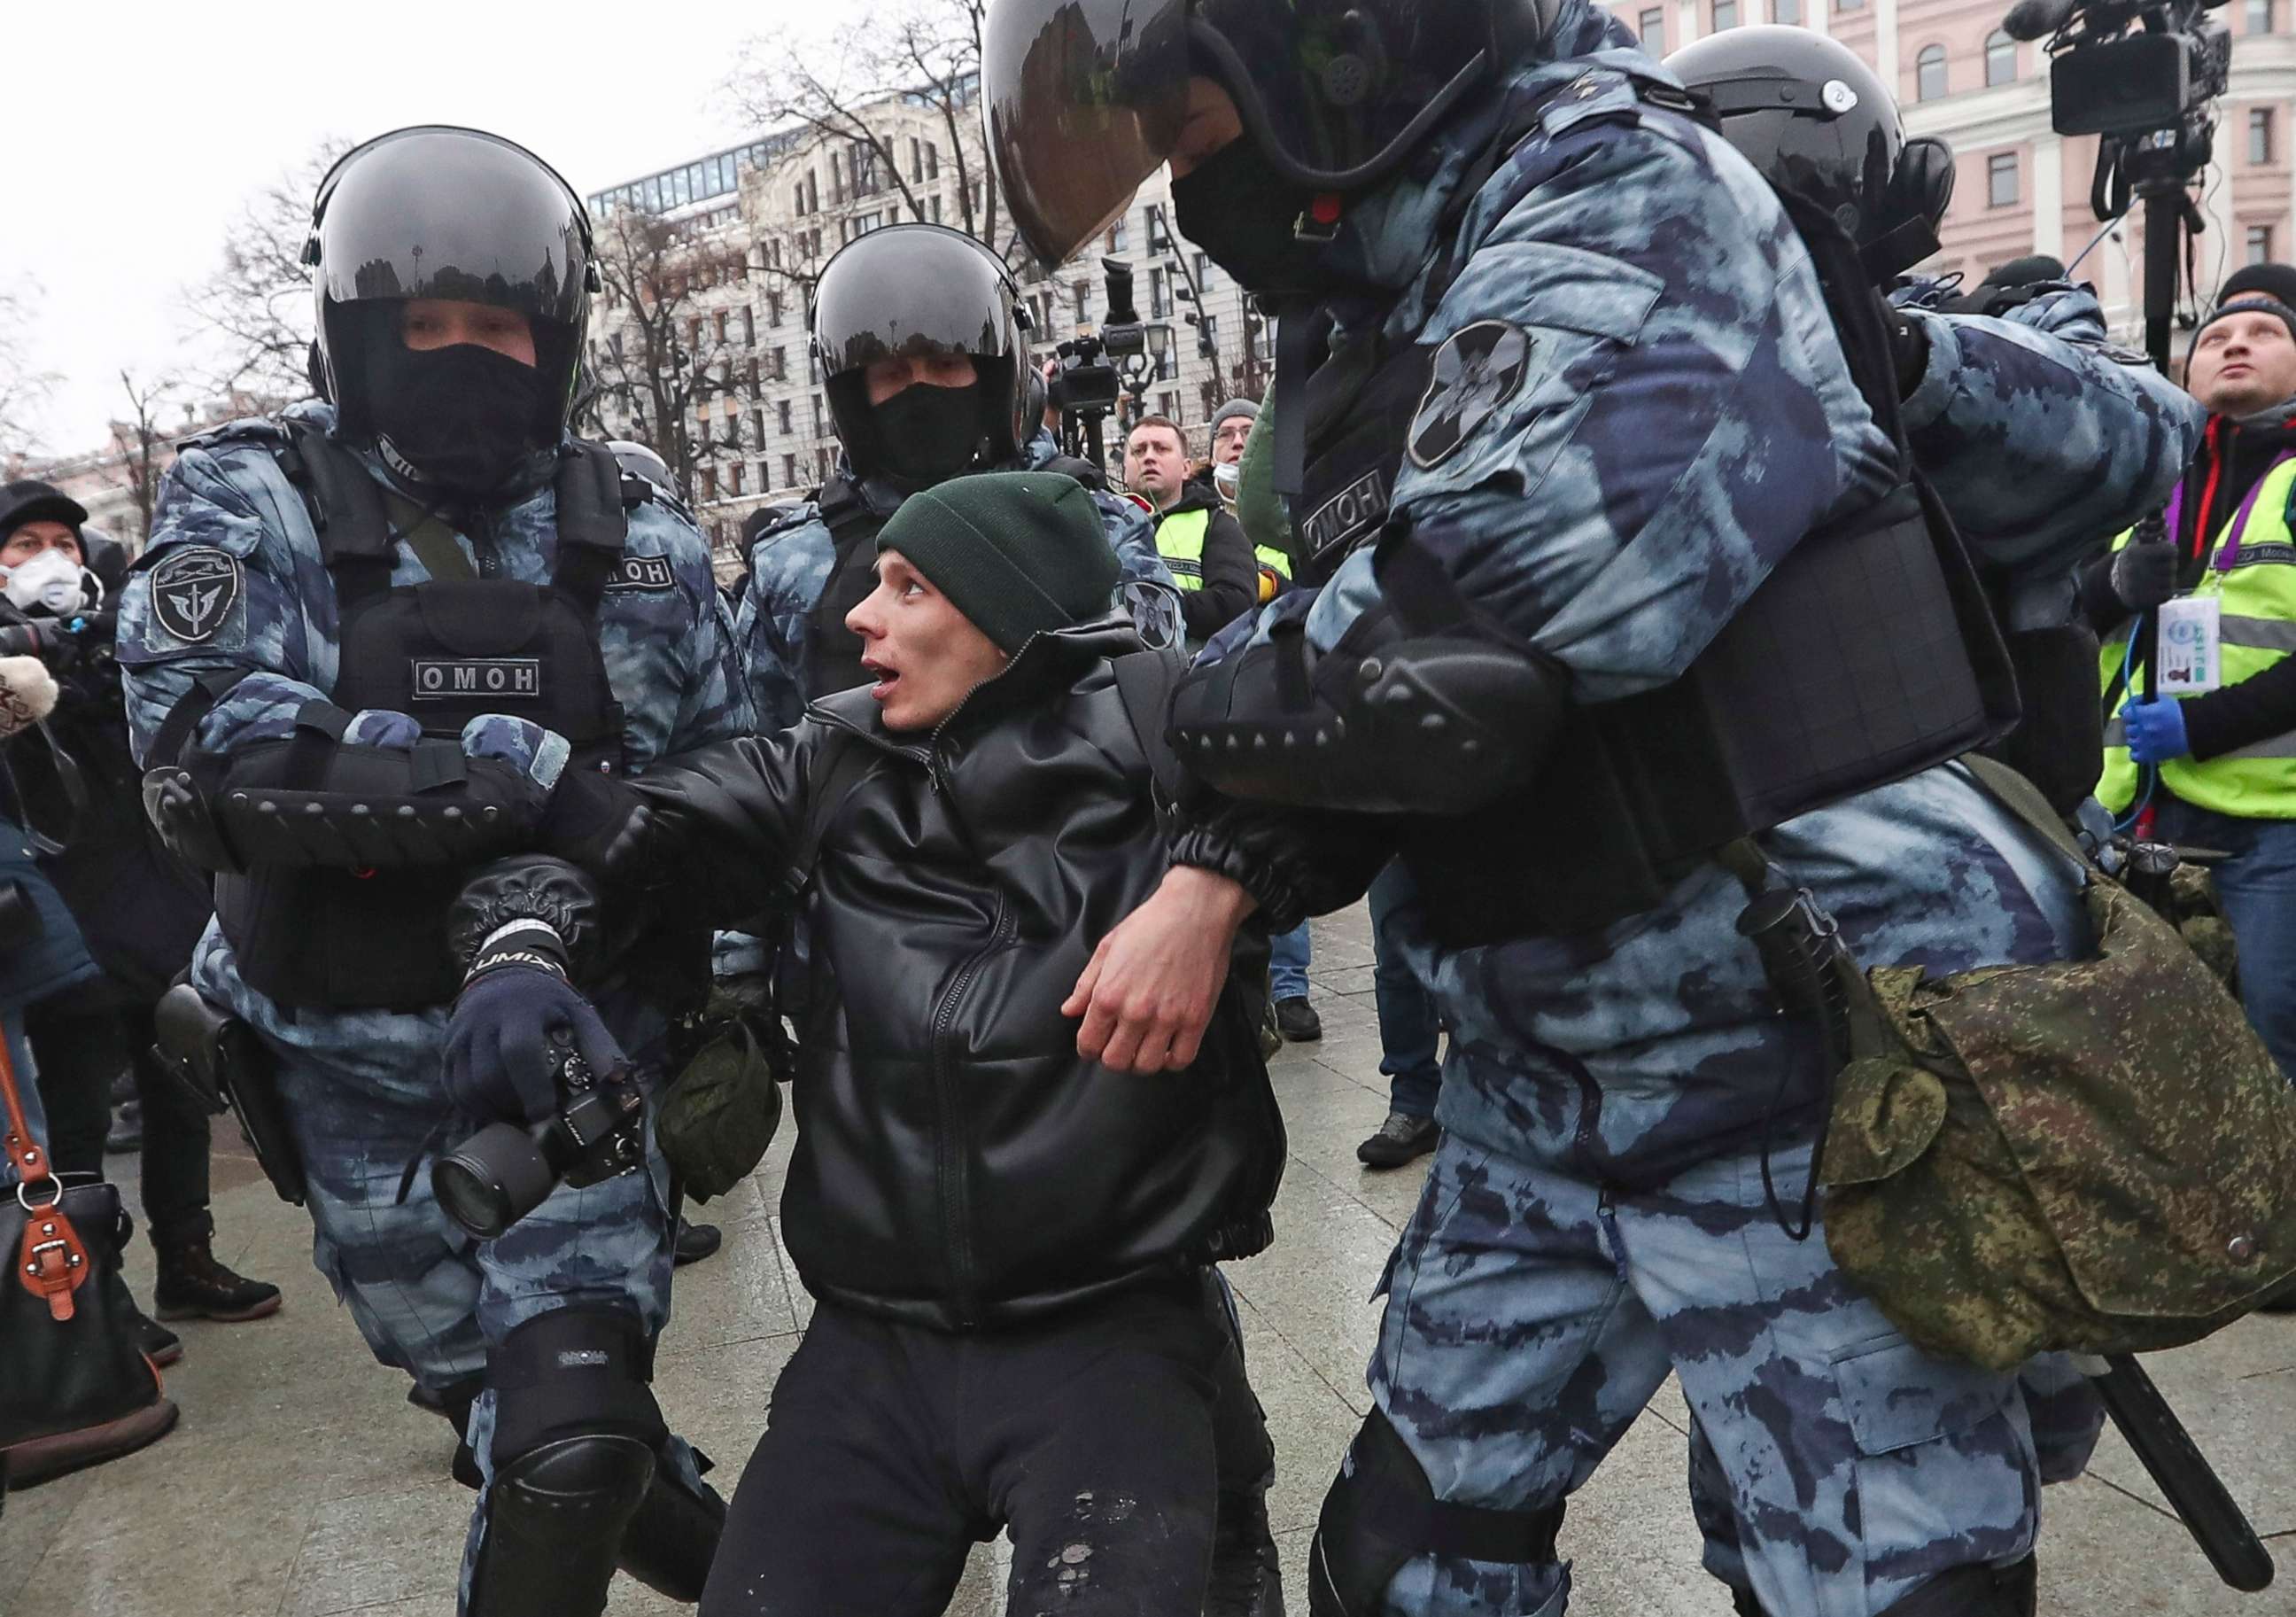 PHOTO: Police detain a man during a protest against the jailing of opposition leader Alexei Navalny in Moscow, Jan. 23, 2021. Russian police arrested hundreds of protesters who took to the streets to demand the release of Alexei Navalny.